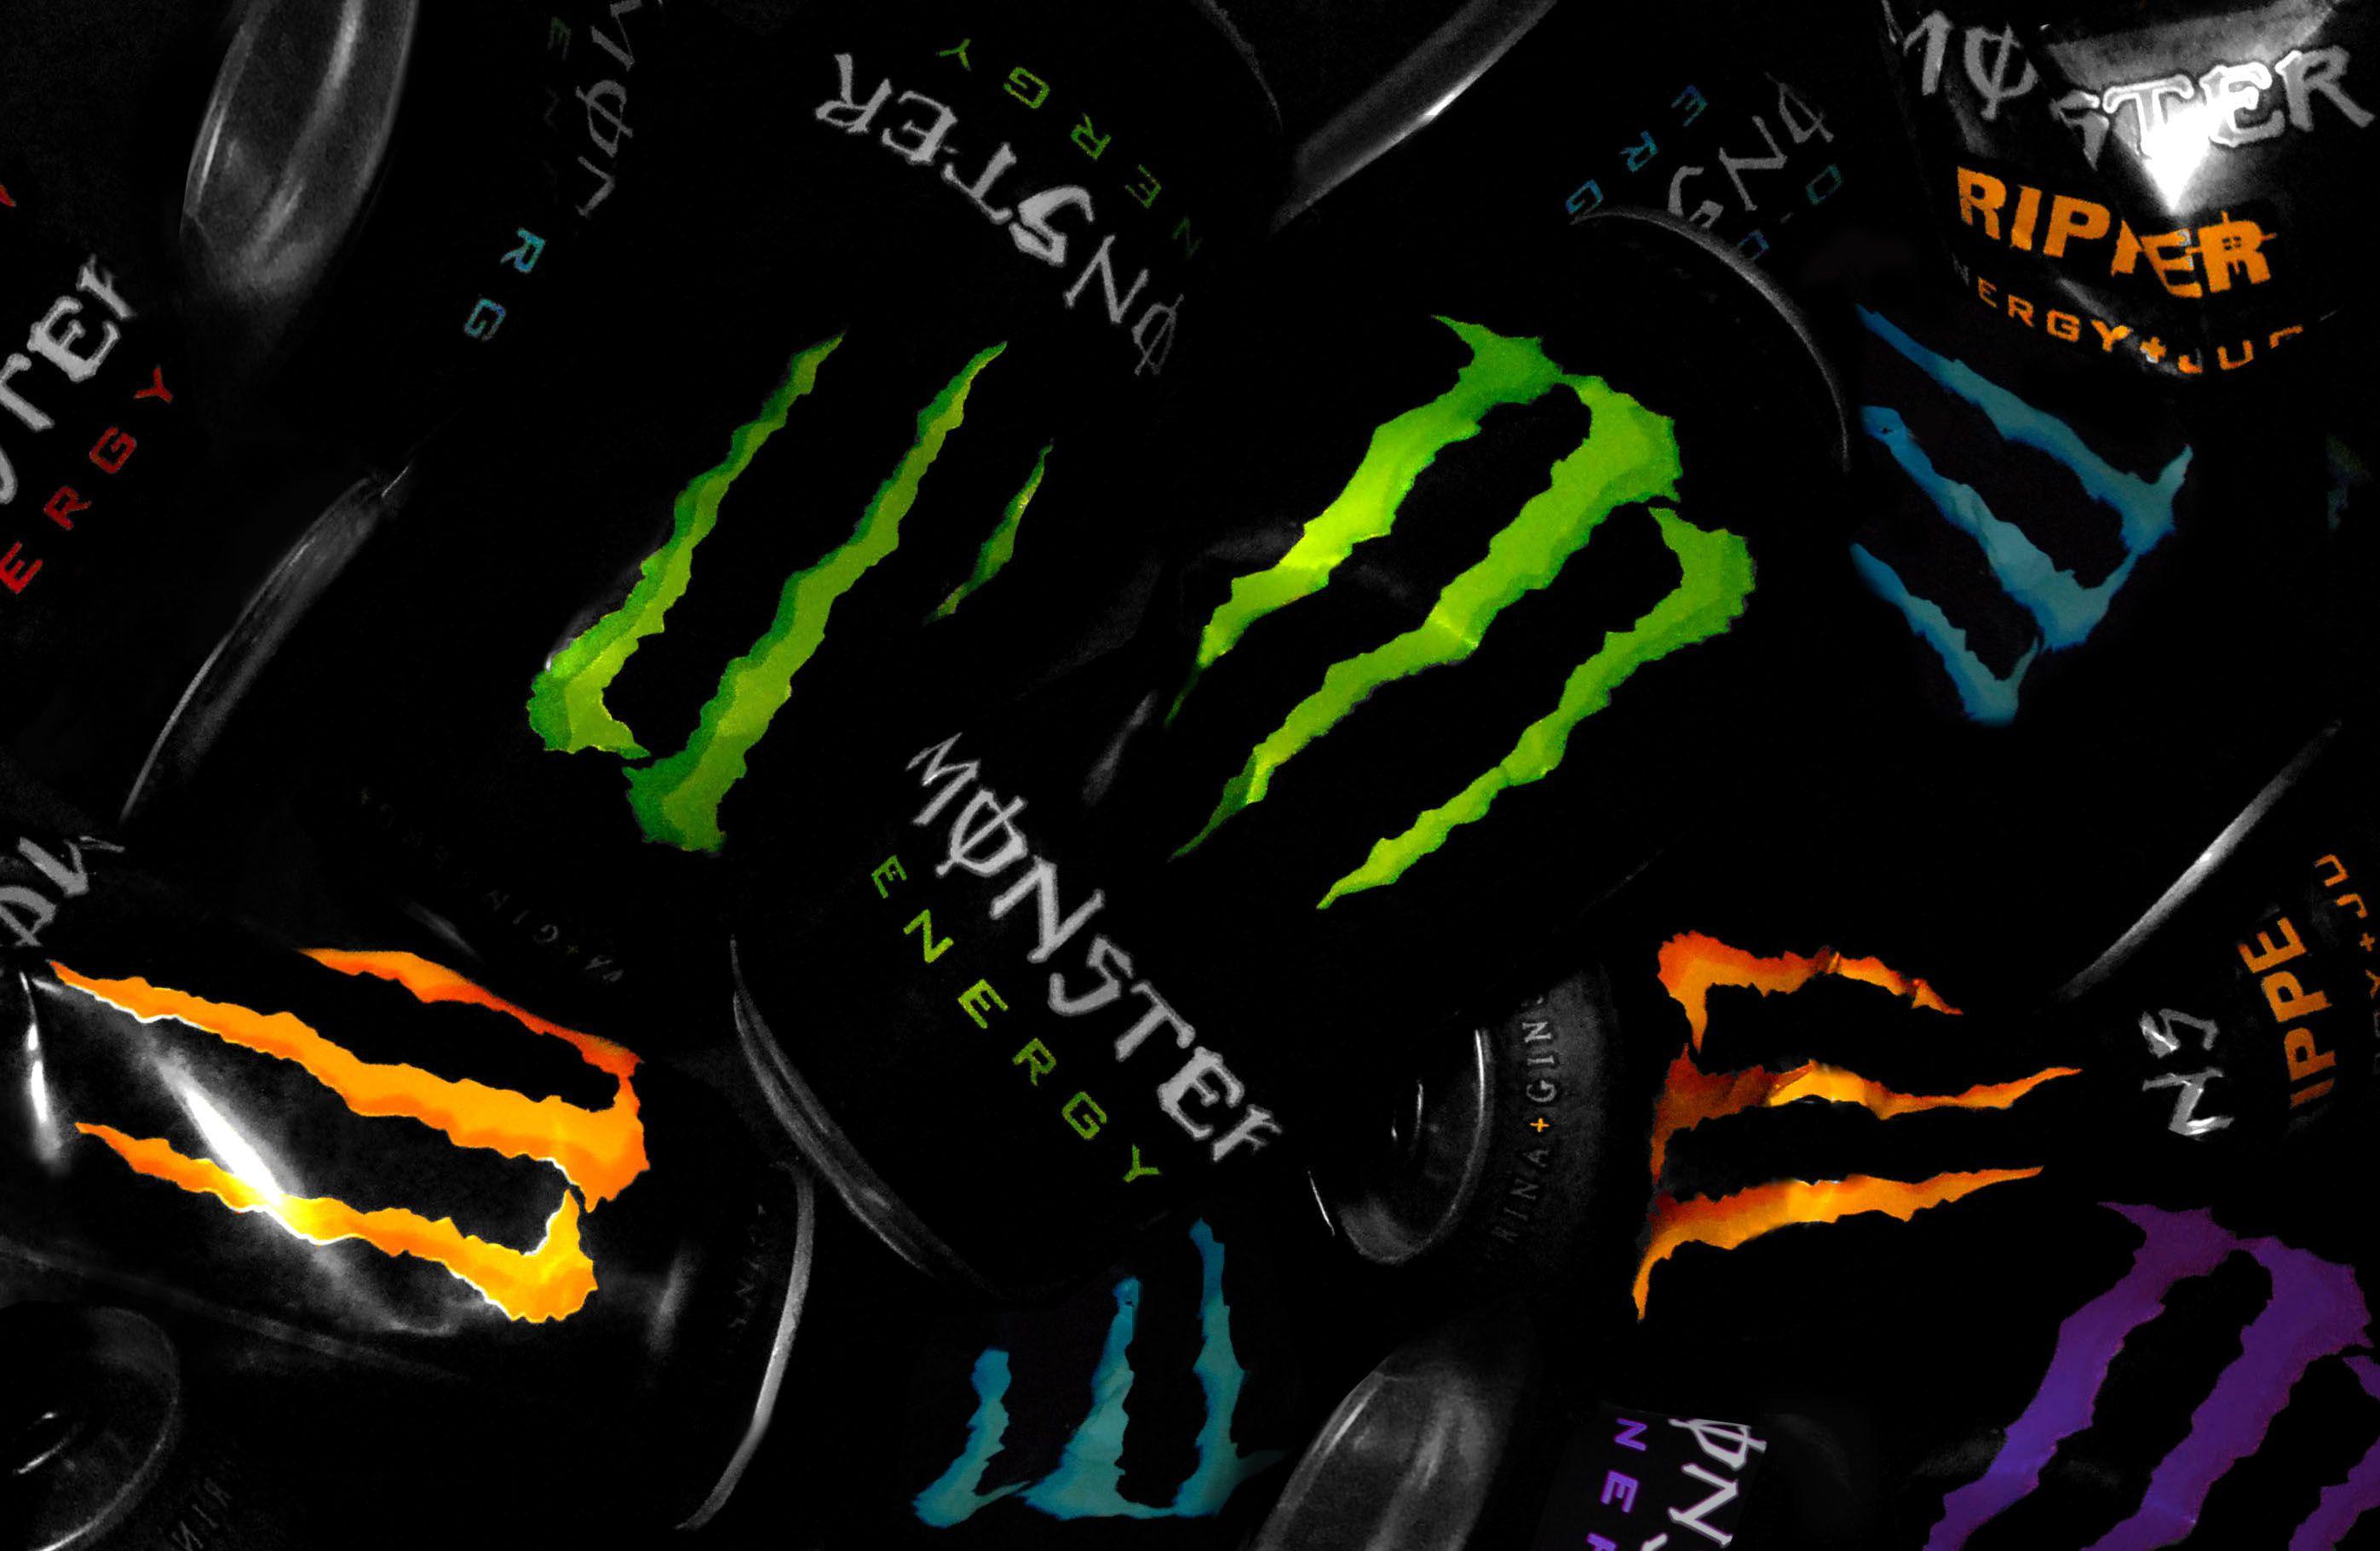 Many Monster Energy Tins Photo Picture HD Wallpaper Free. Monster